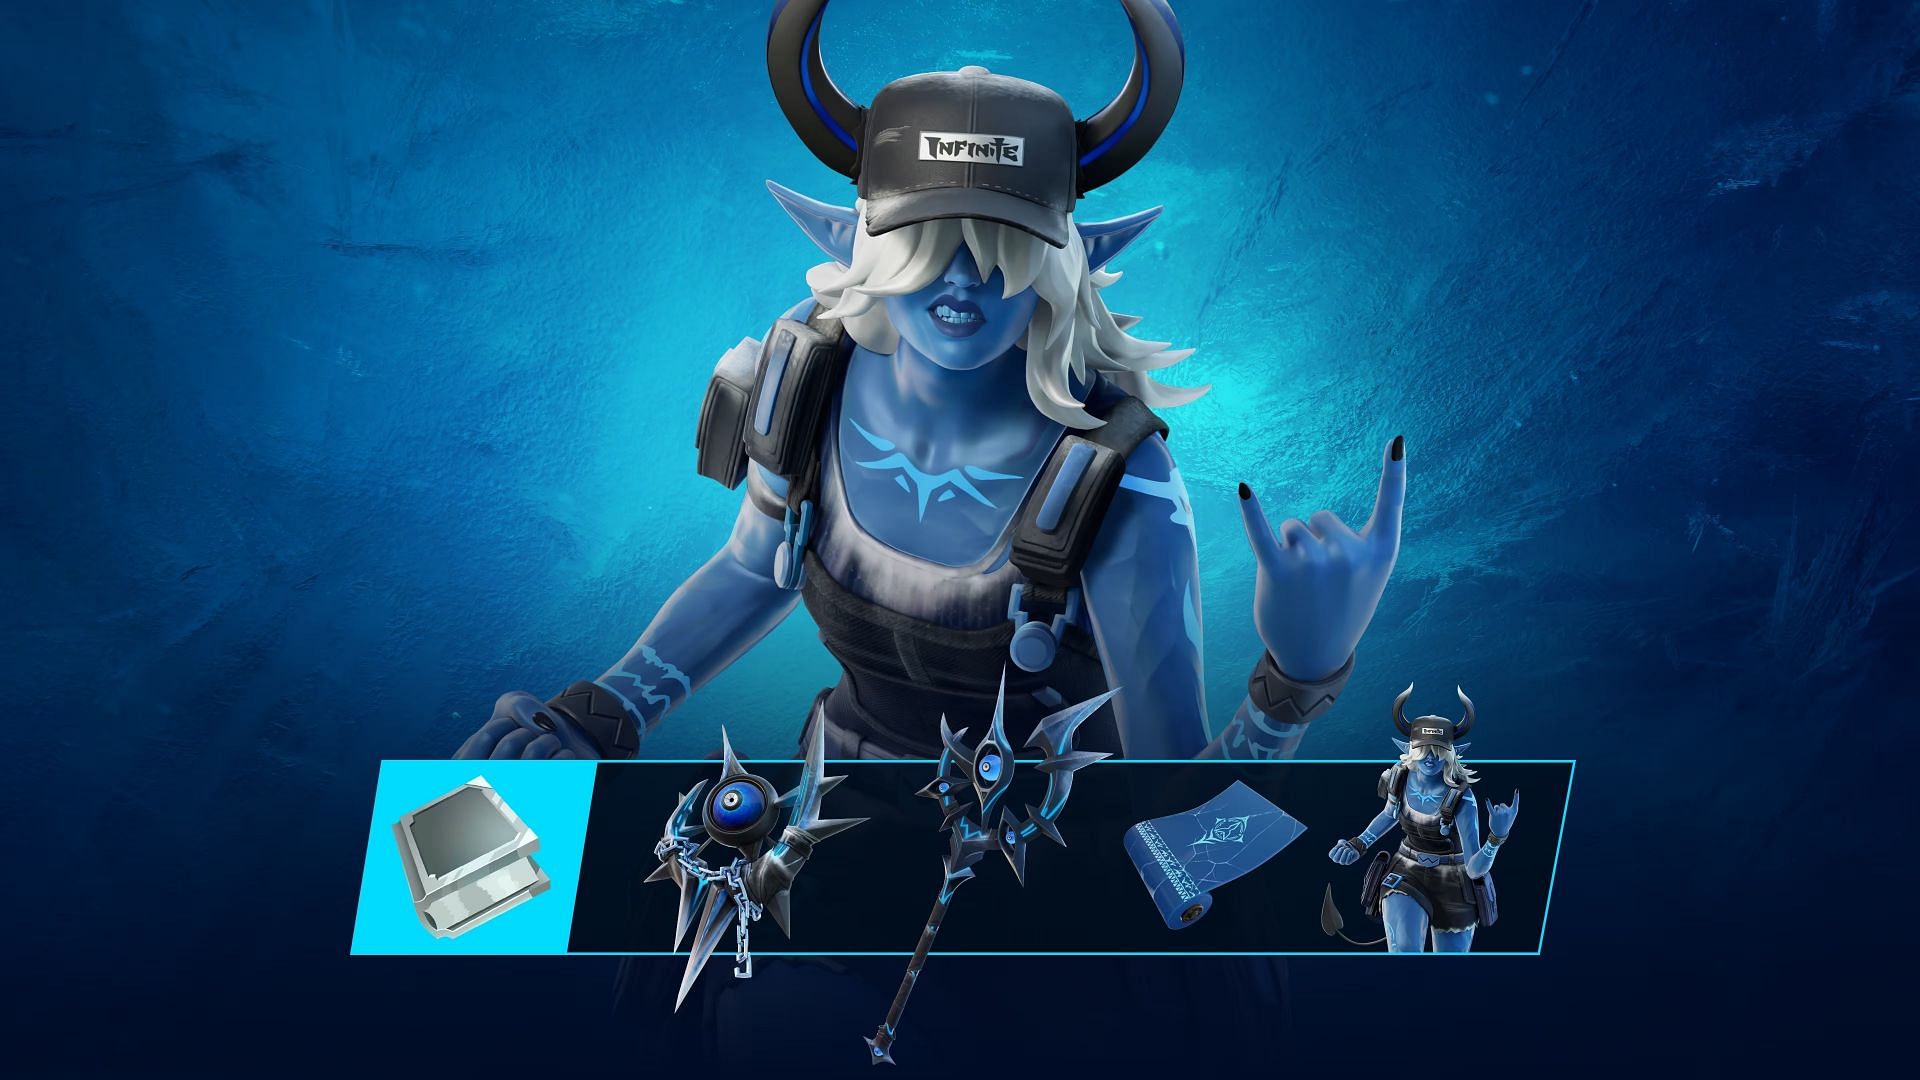 The new quest pack requires players to earn account levels in Fortnite (Image via Epic Games)